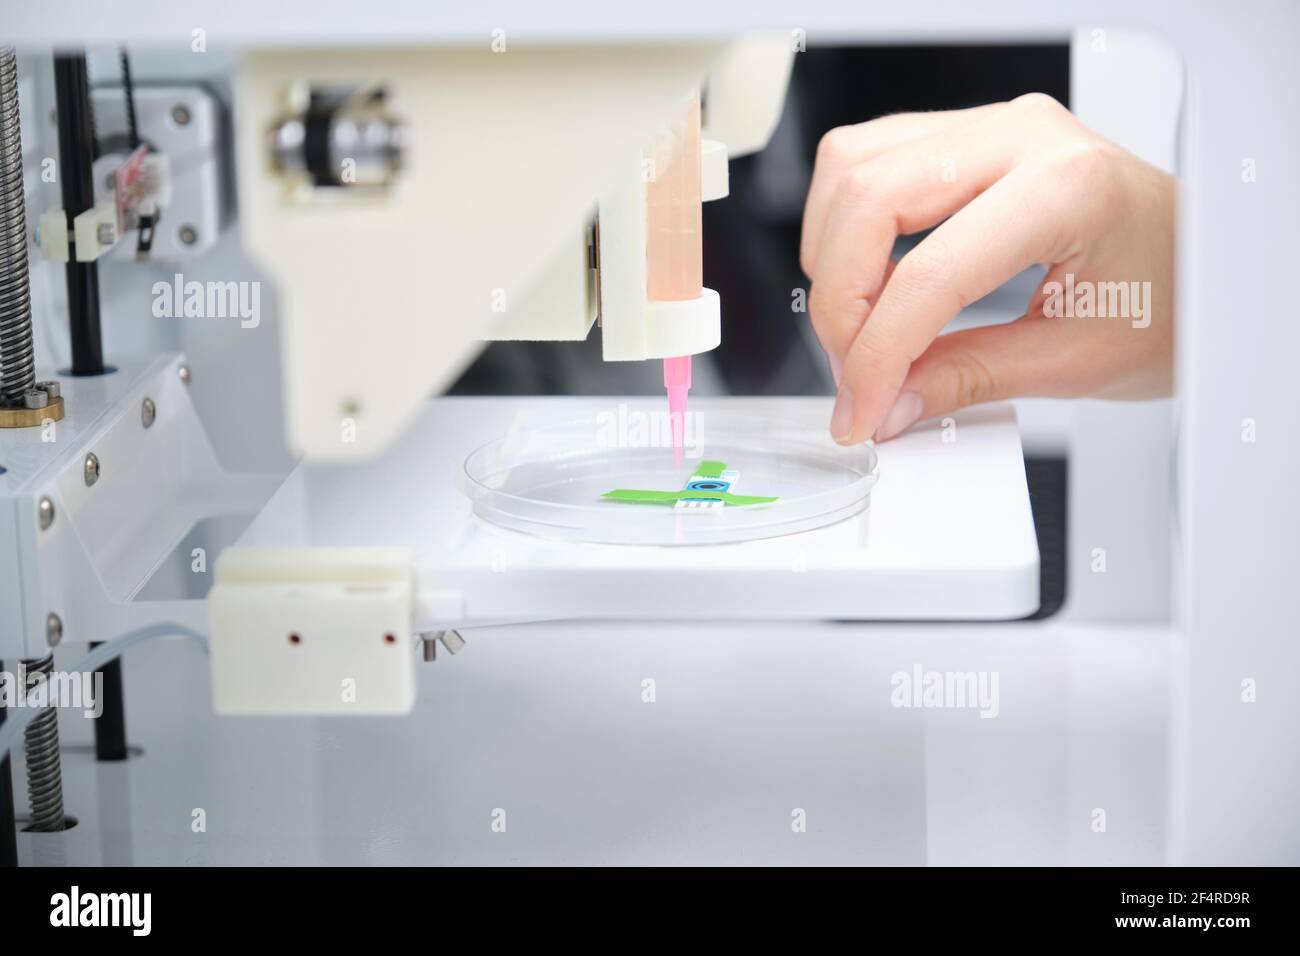 Researcher getting 3D bioprinter ready to 3D print cells onto an electrode. Biomaterials, tissue engineering concepts. Stock Photo